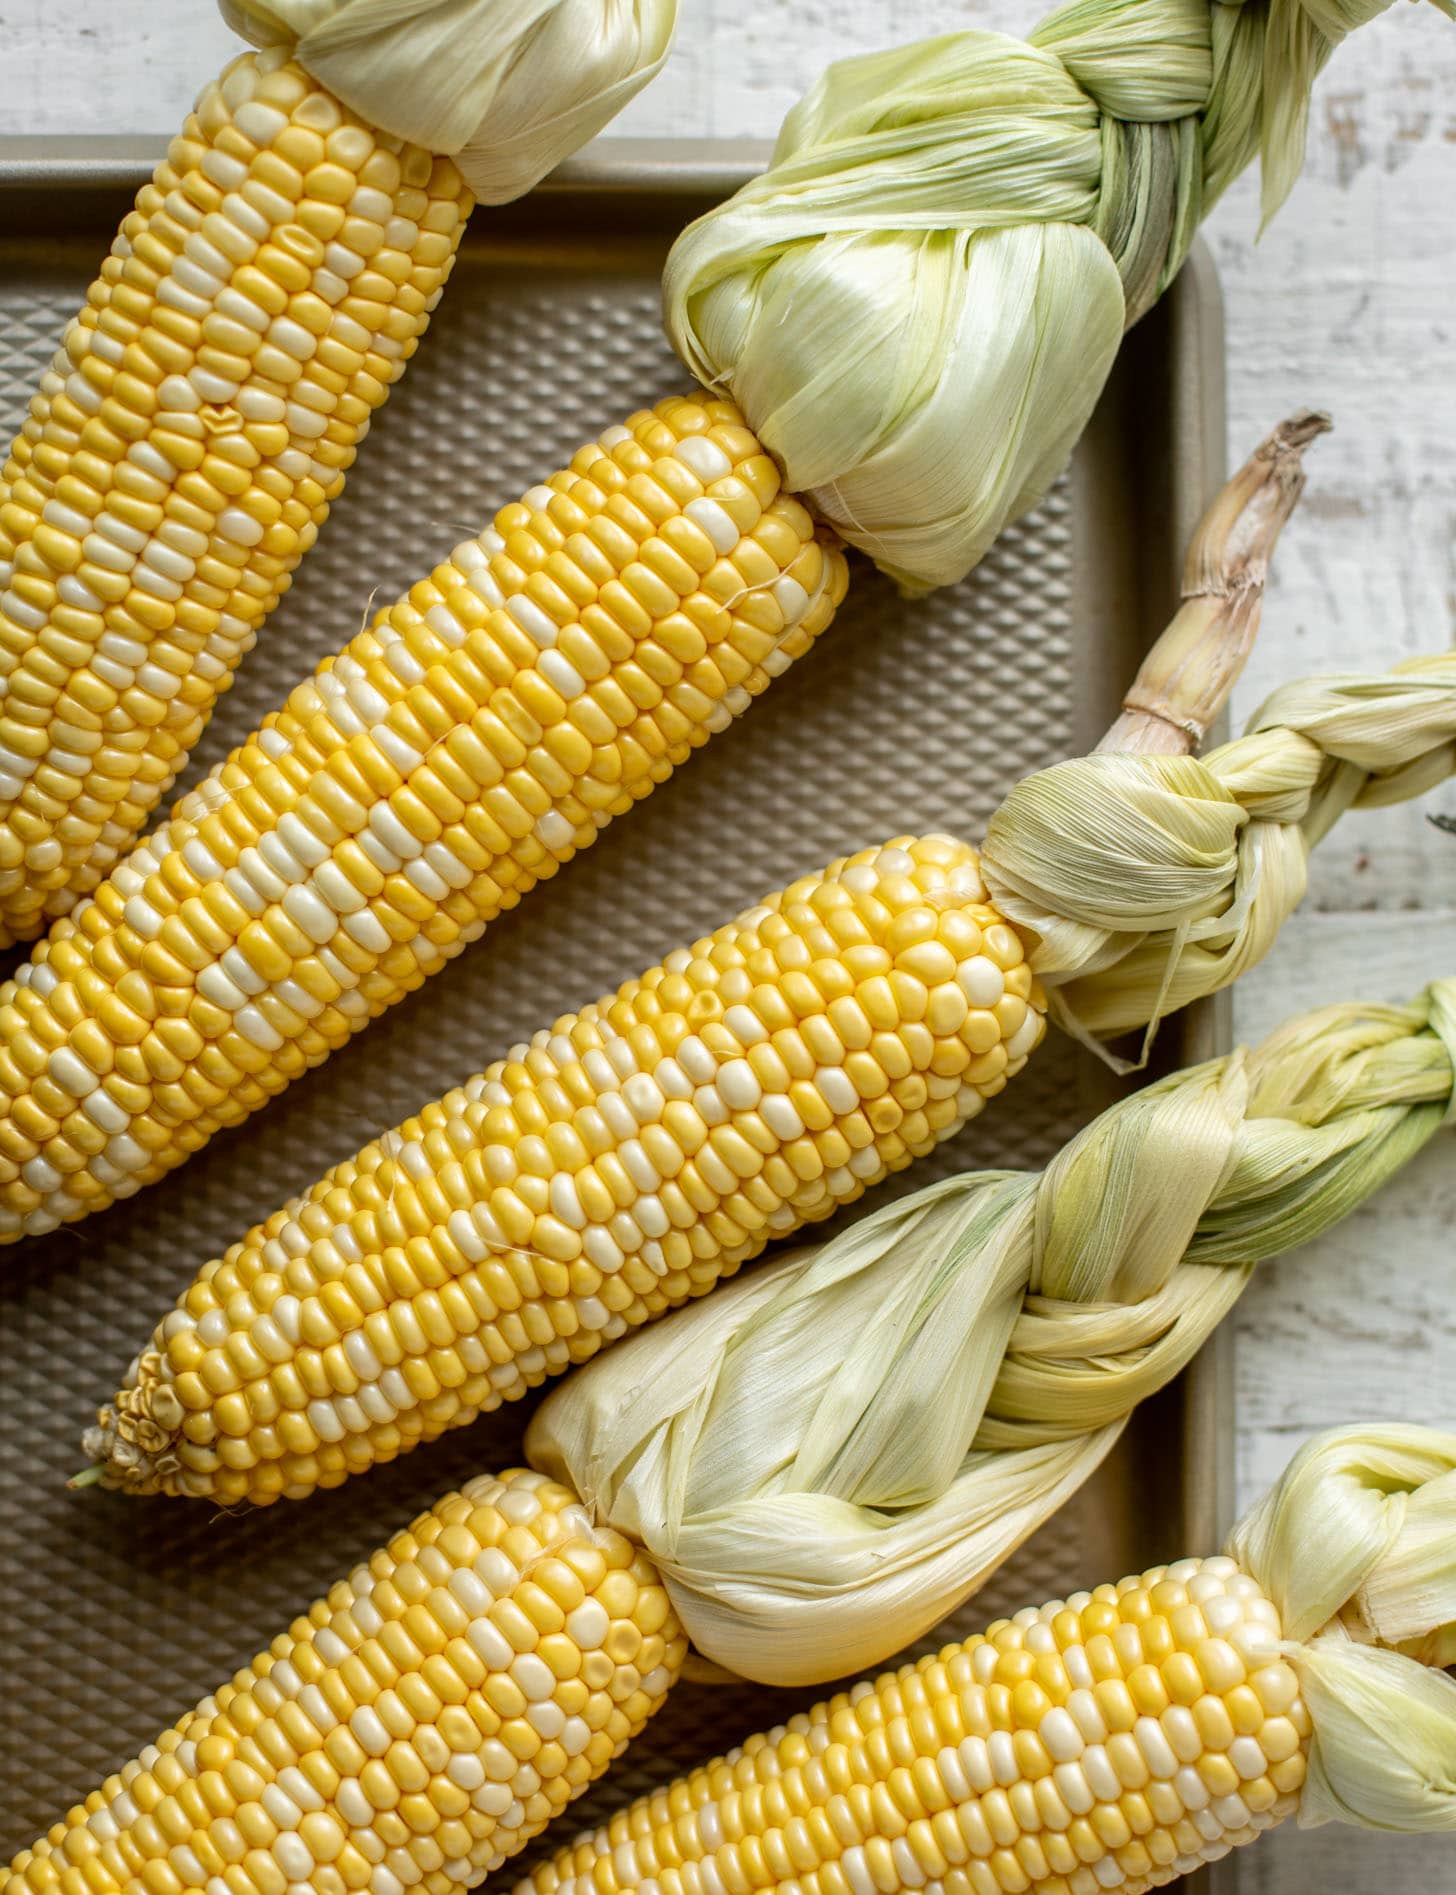 corn on the cob with braided husks